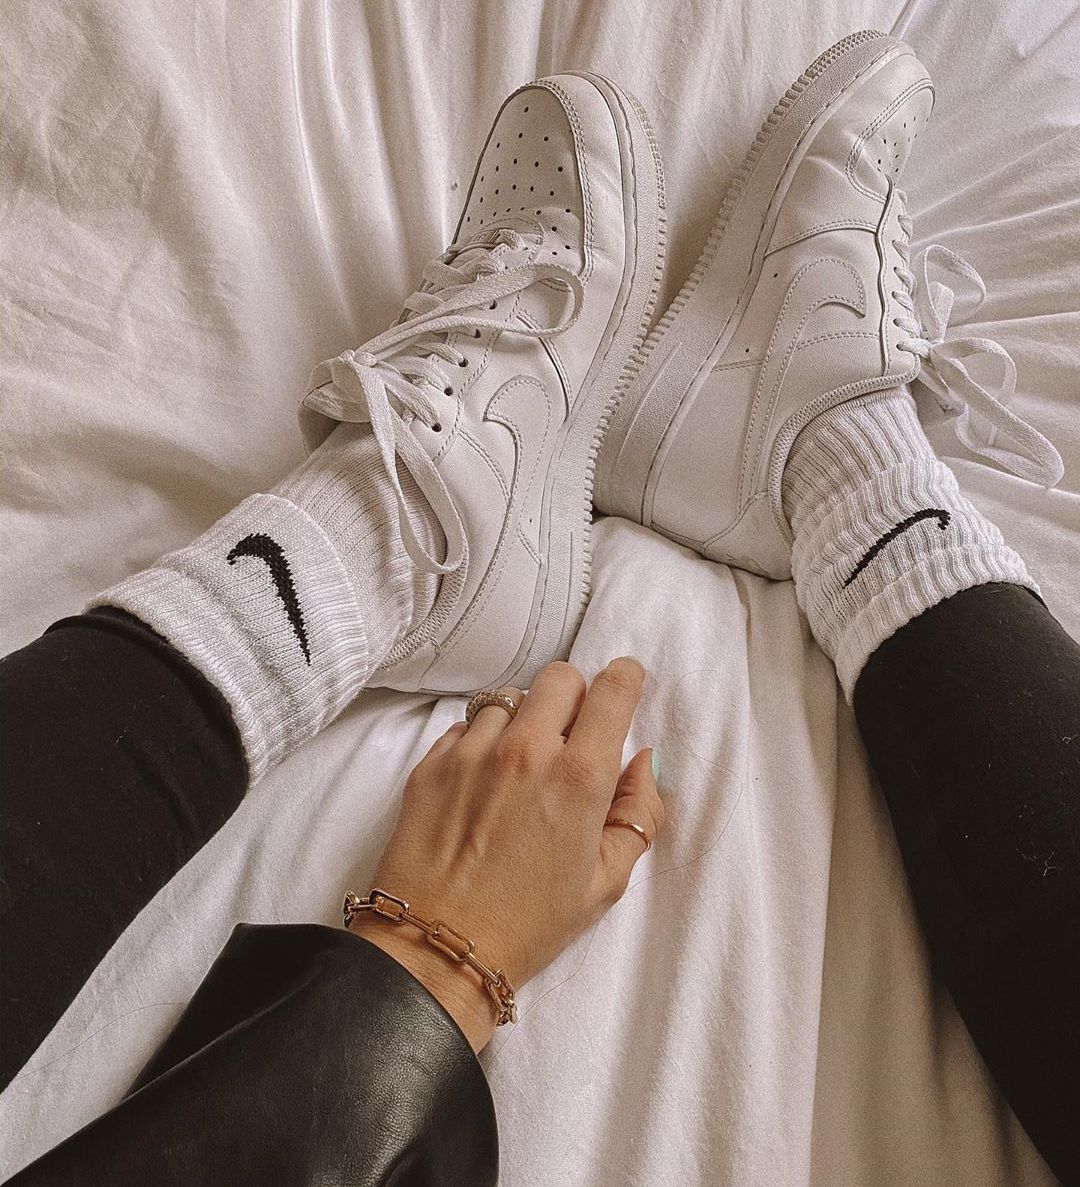 8 Outfits That Prove Nike Socks Are 